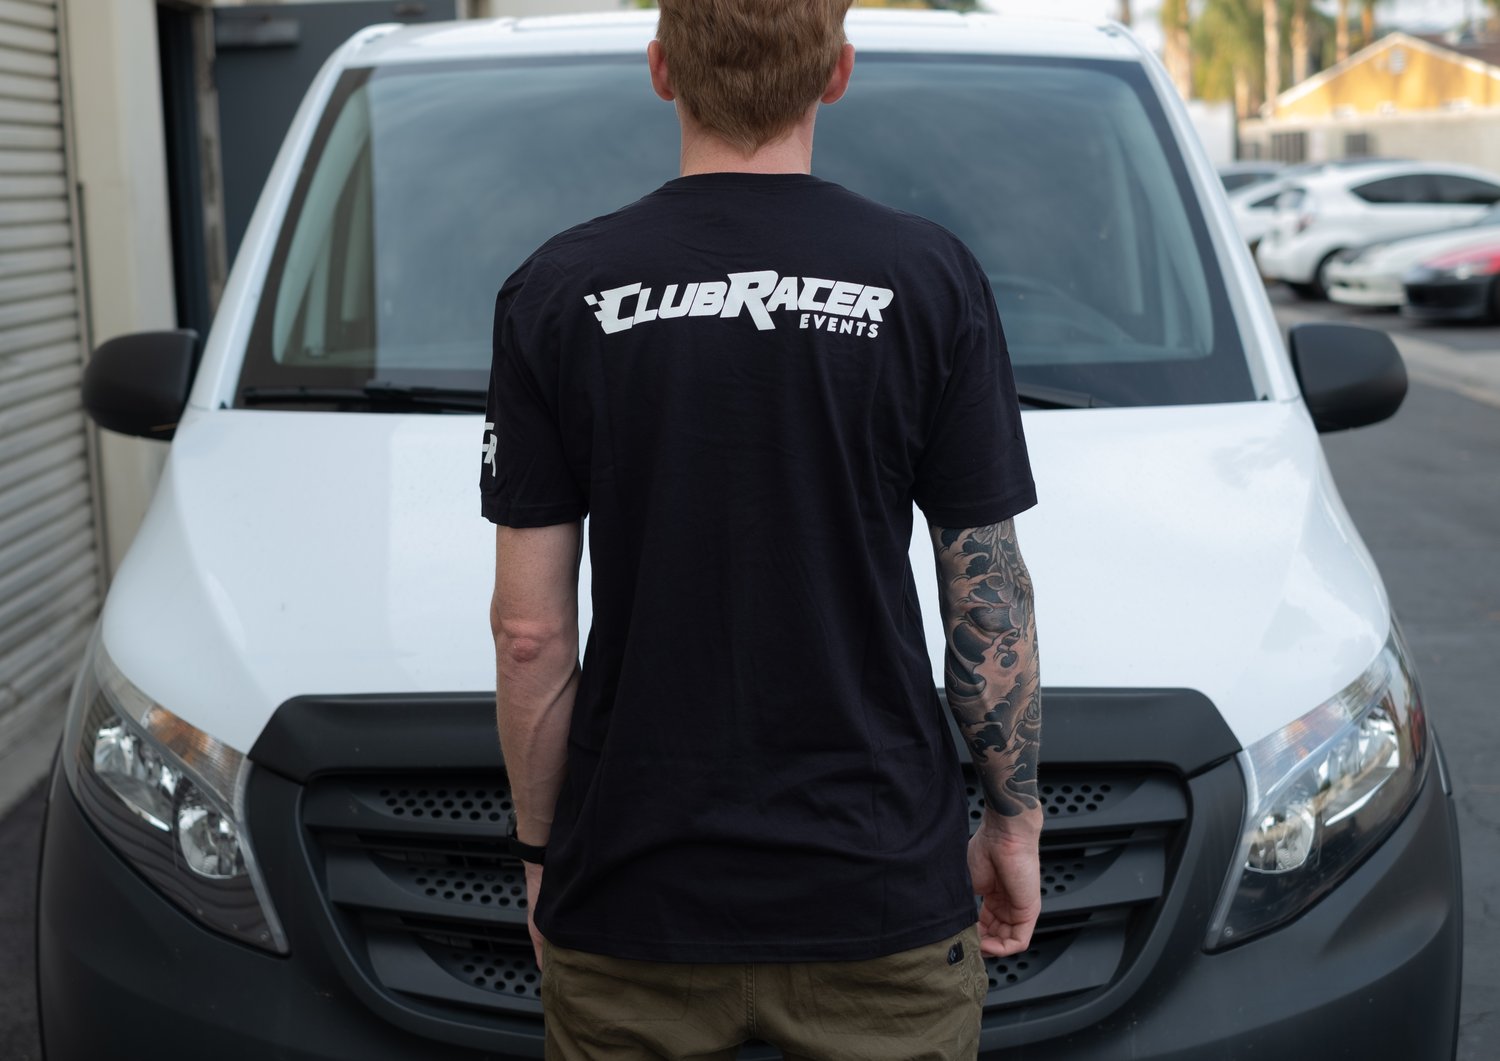 Image of Club Racer T-Shirt